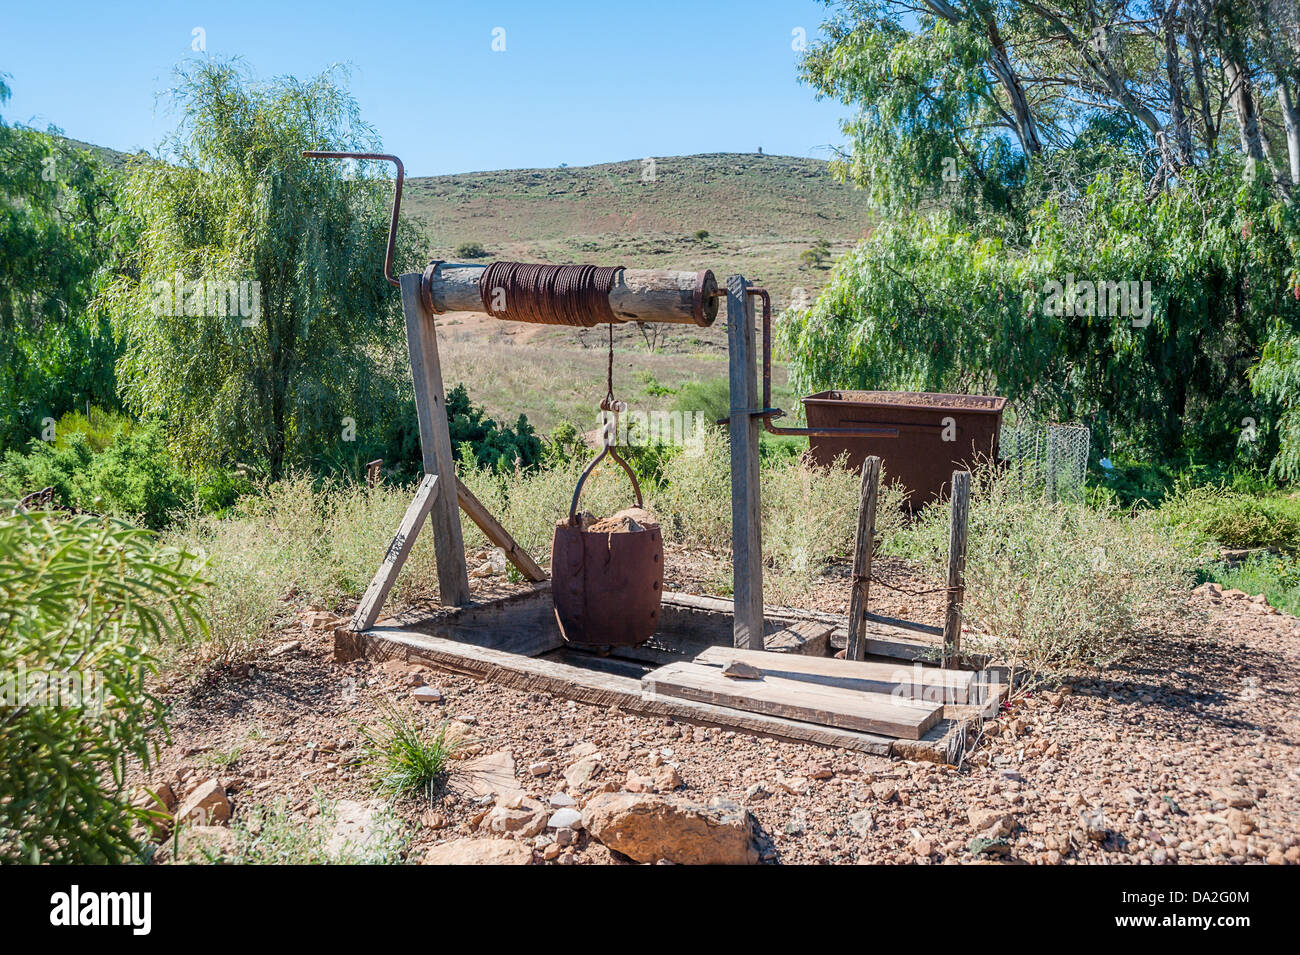 An old mine shaft in the town of Blinman near the ruggedly beautiful Flinders Ranges in the Australian outback. Stock Photo